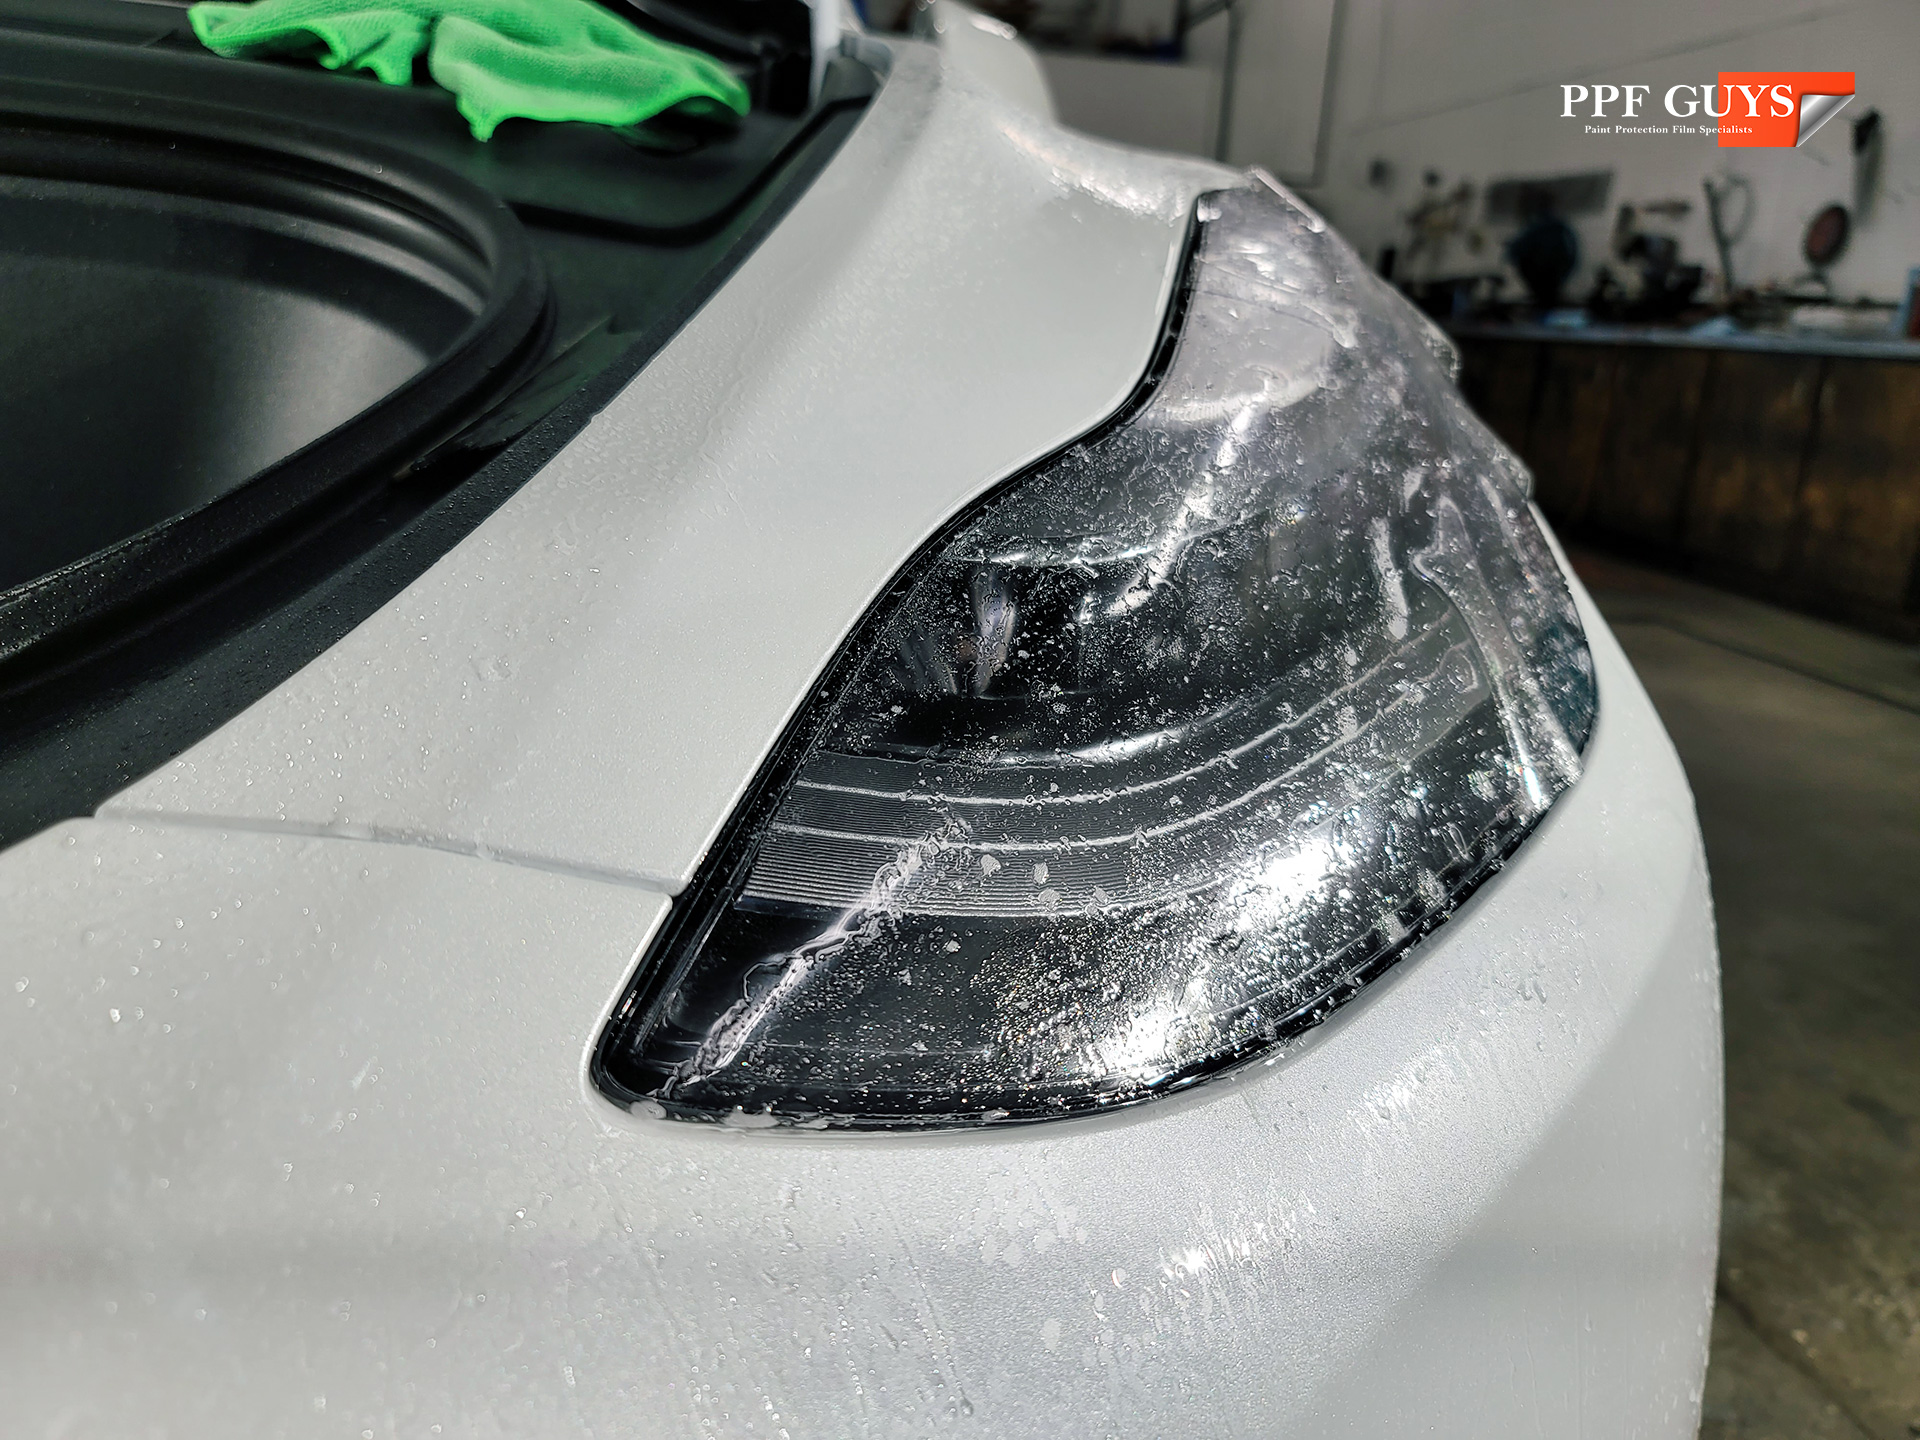 PPF Guys Model Y White Xpel Stealth, ceramic, painted emblems (20).jpg